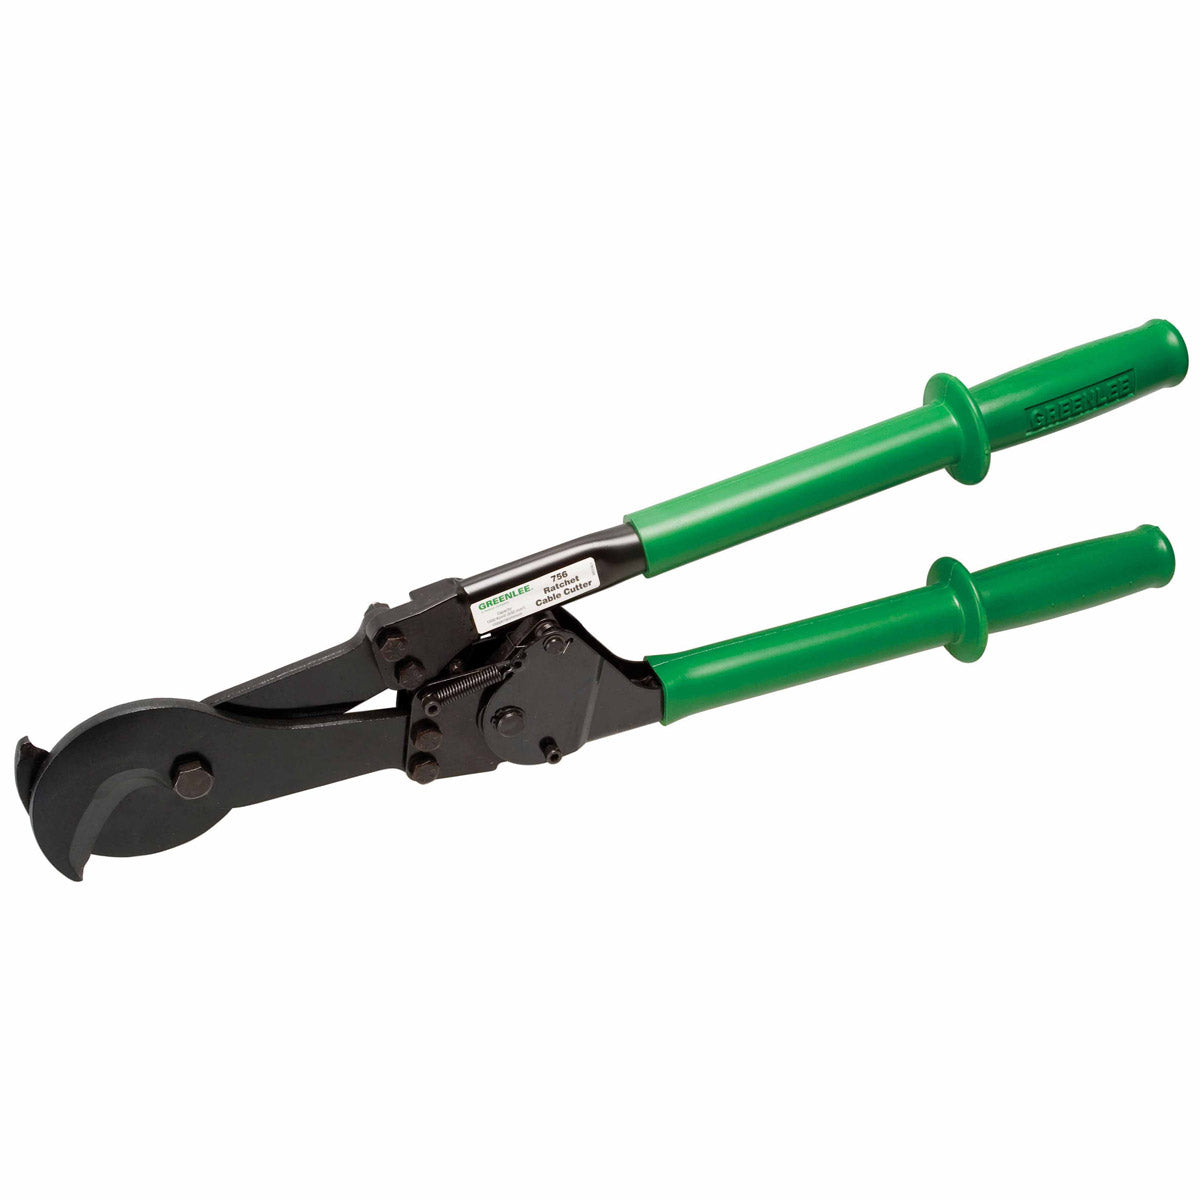 Greenlee 756 RATCHET CABLE CUTTER